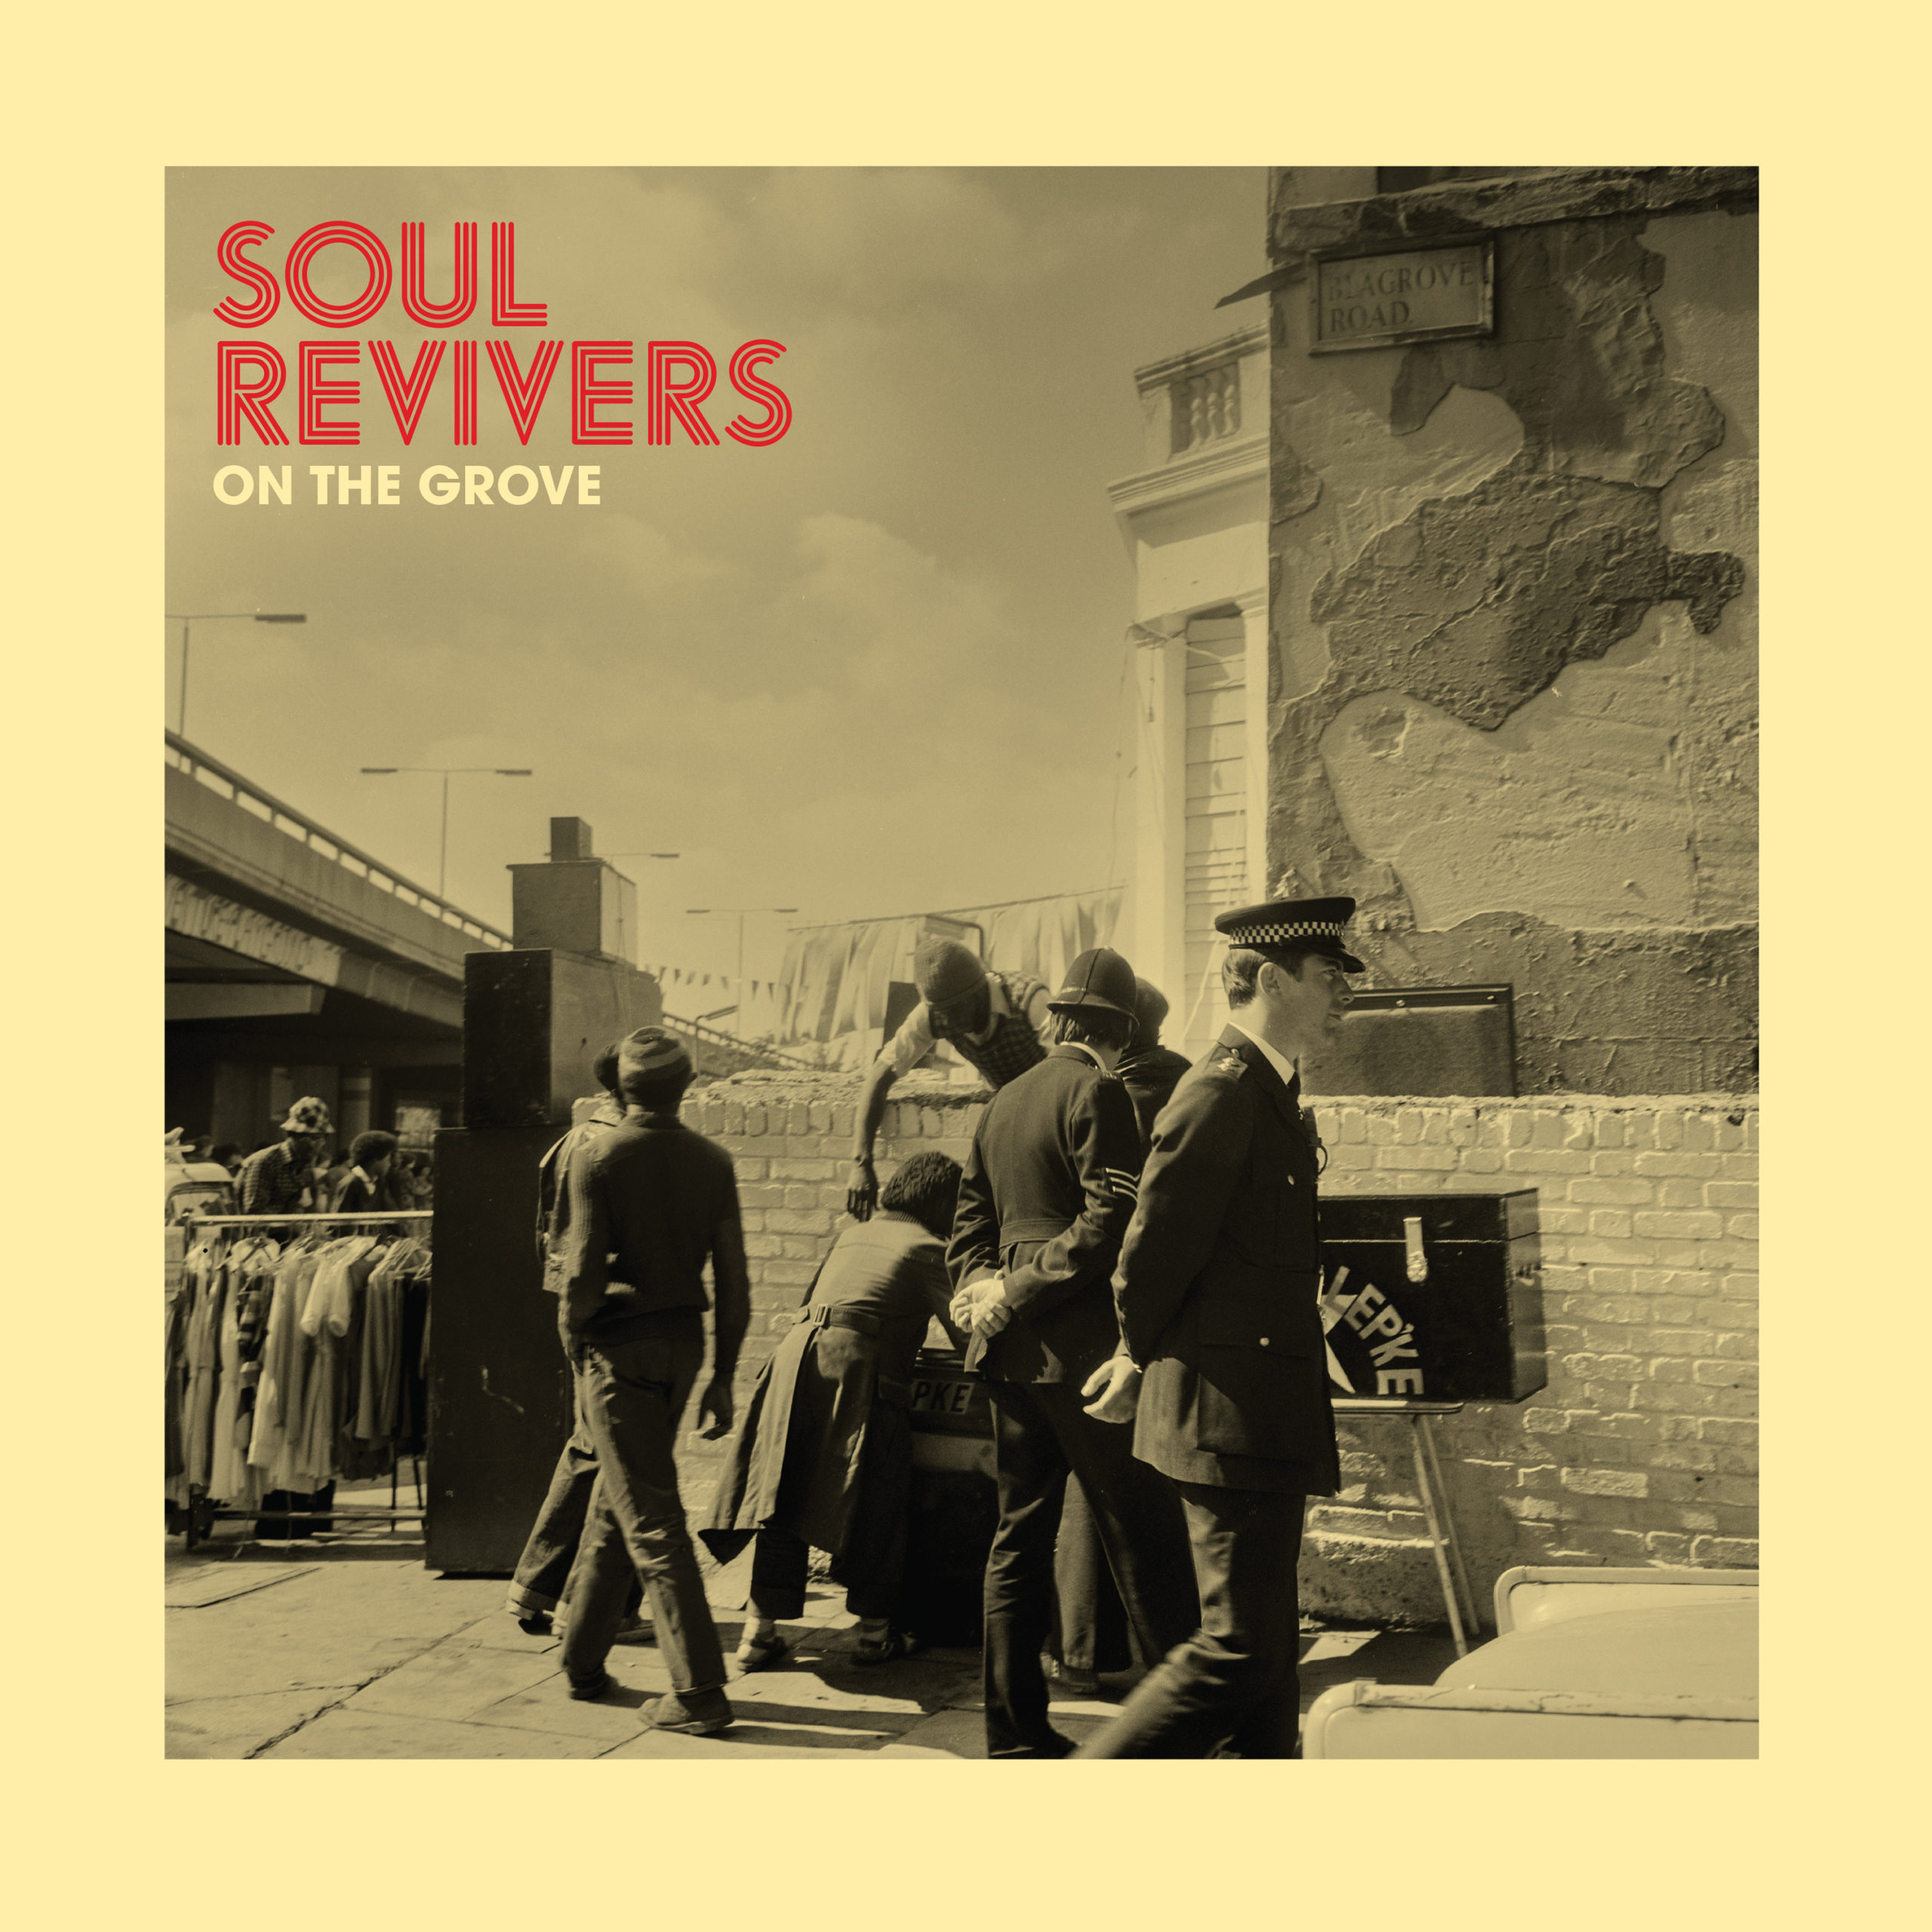 Soul Revivers On the Grove